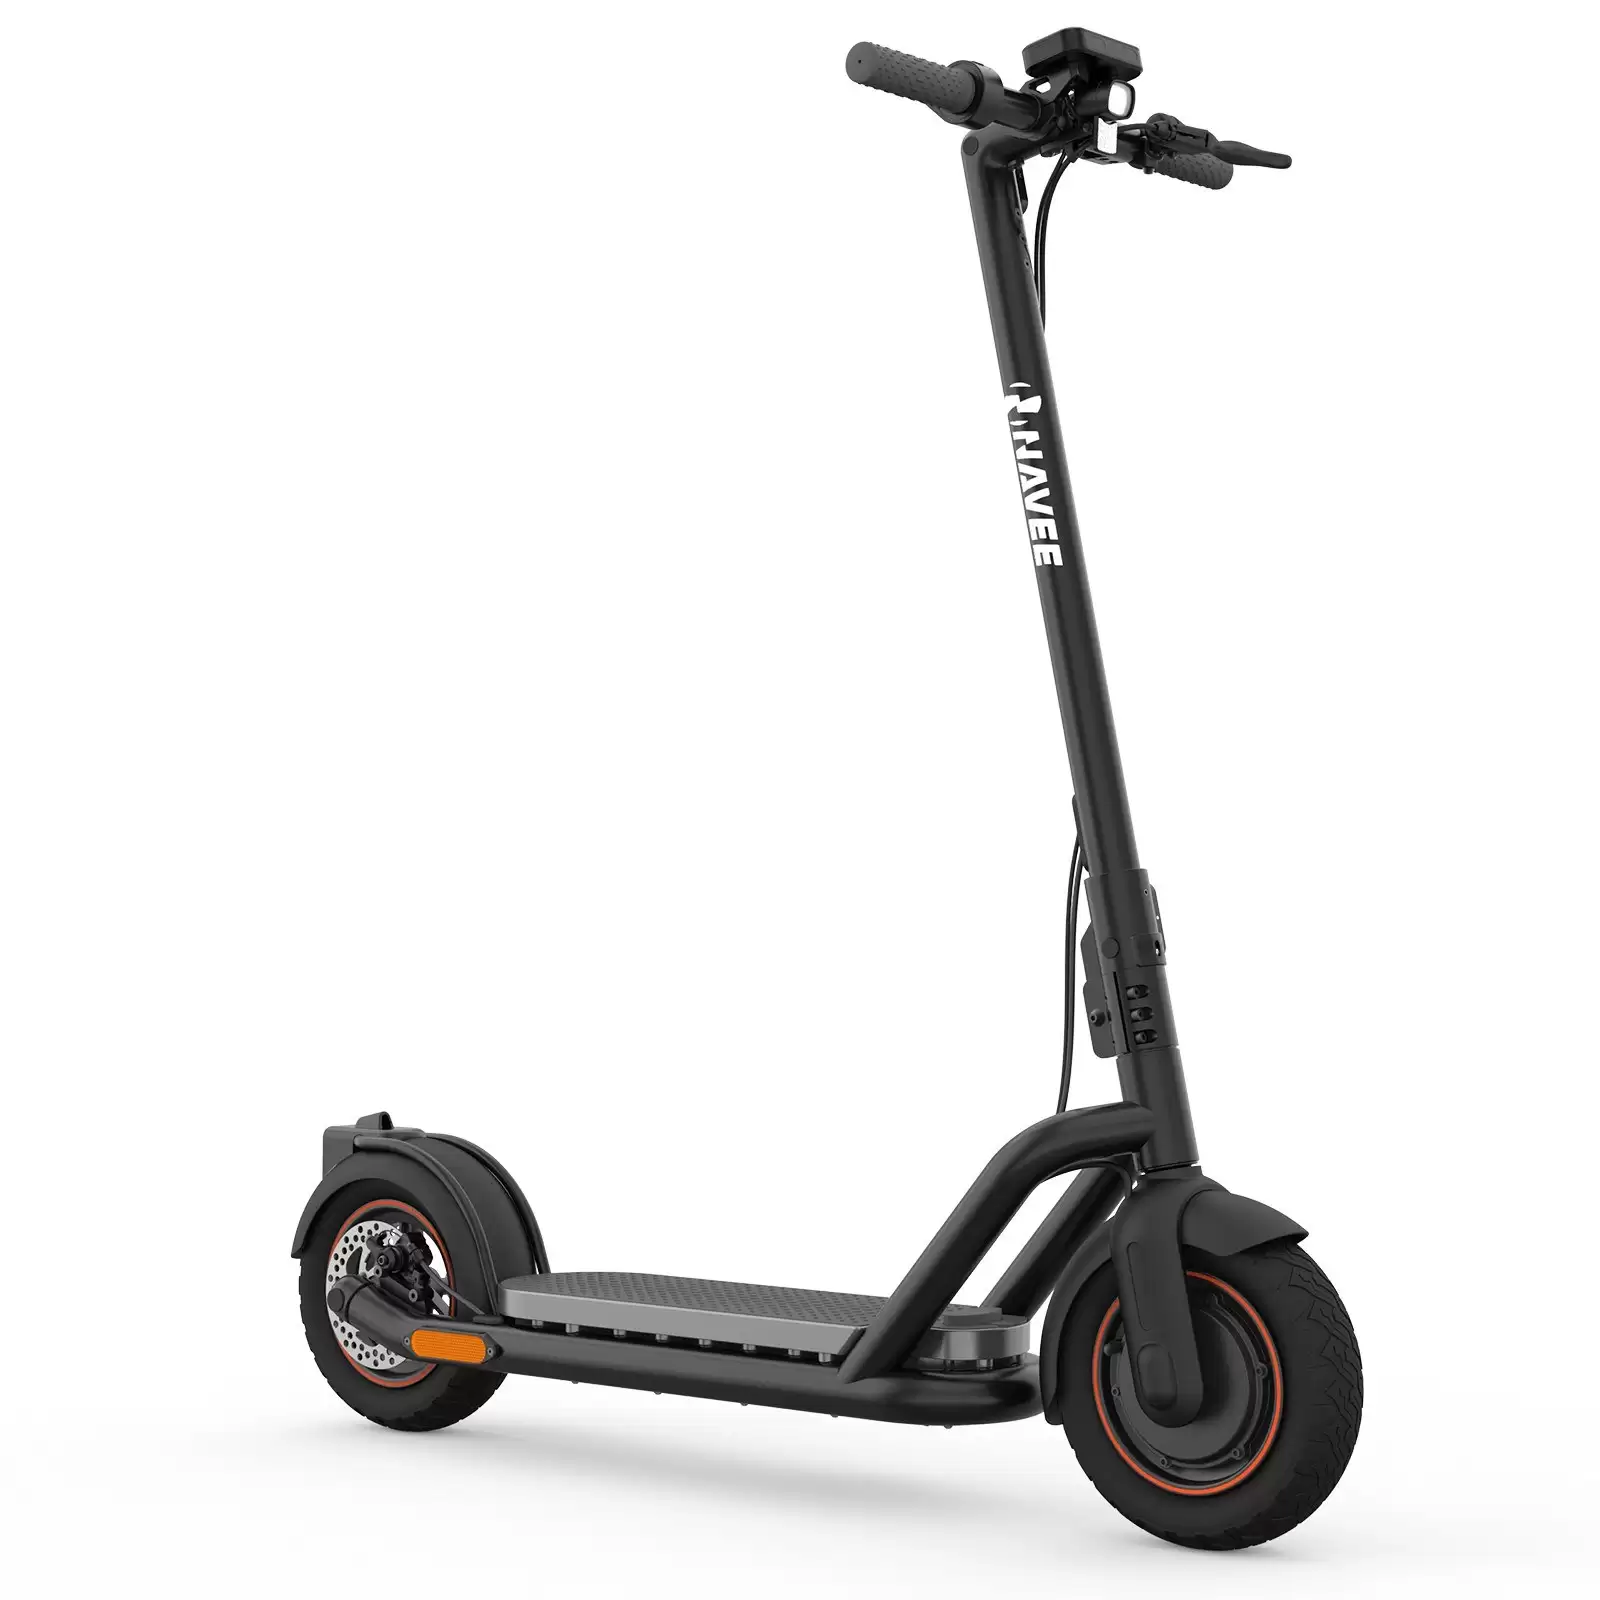 Order In Just $359 Navee N65 500w Motor 25km/h 10 Inch Pneumatic Tires Electric Scooter For Adults/teens With This Tomtop Discount Voucher